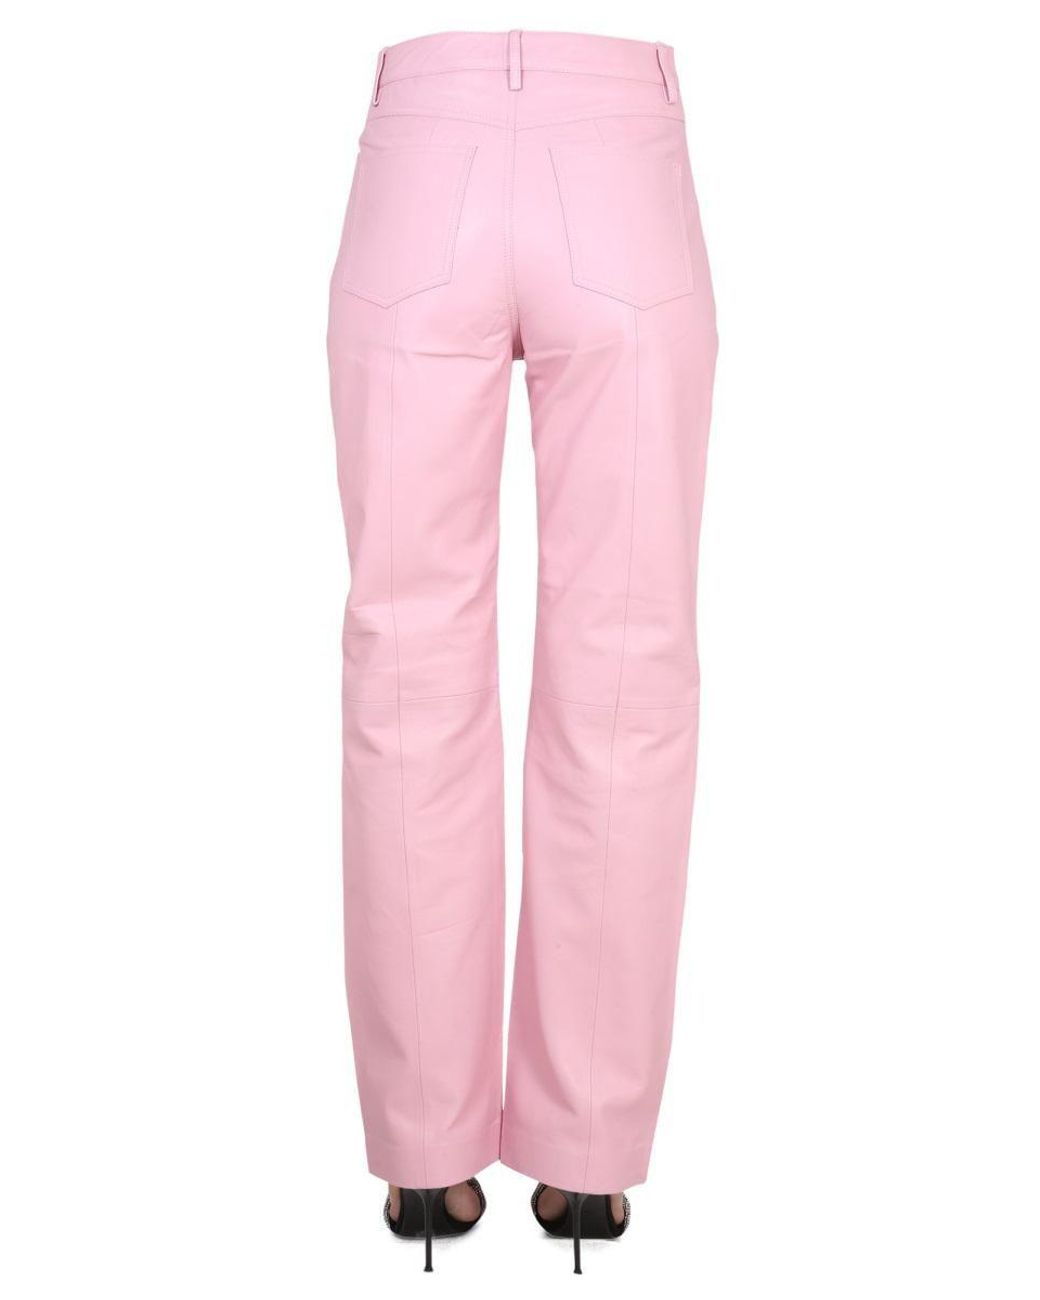 REMAIN Birger Christensen Leather Pants in Pink | Lyst